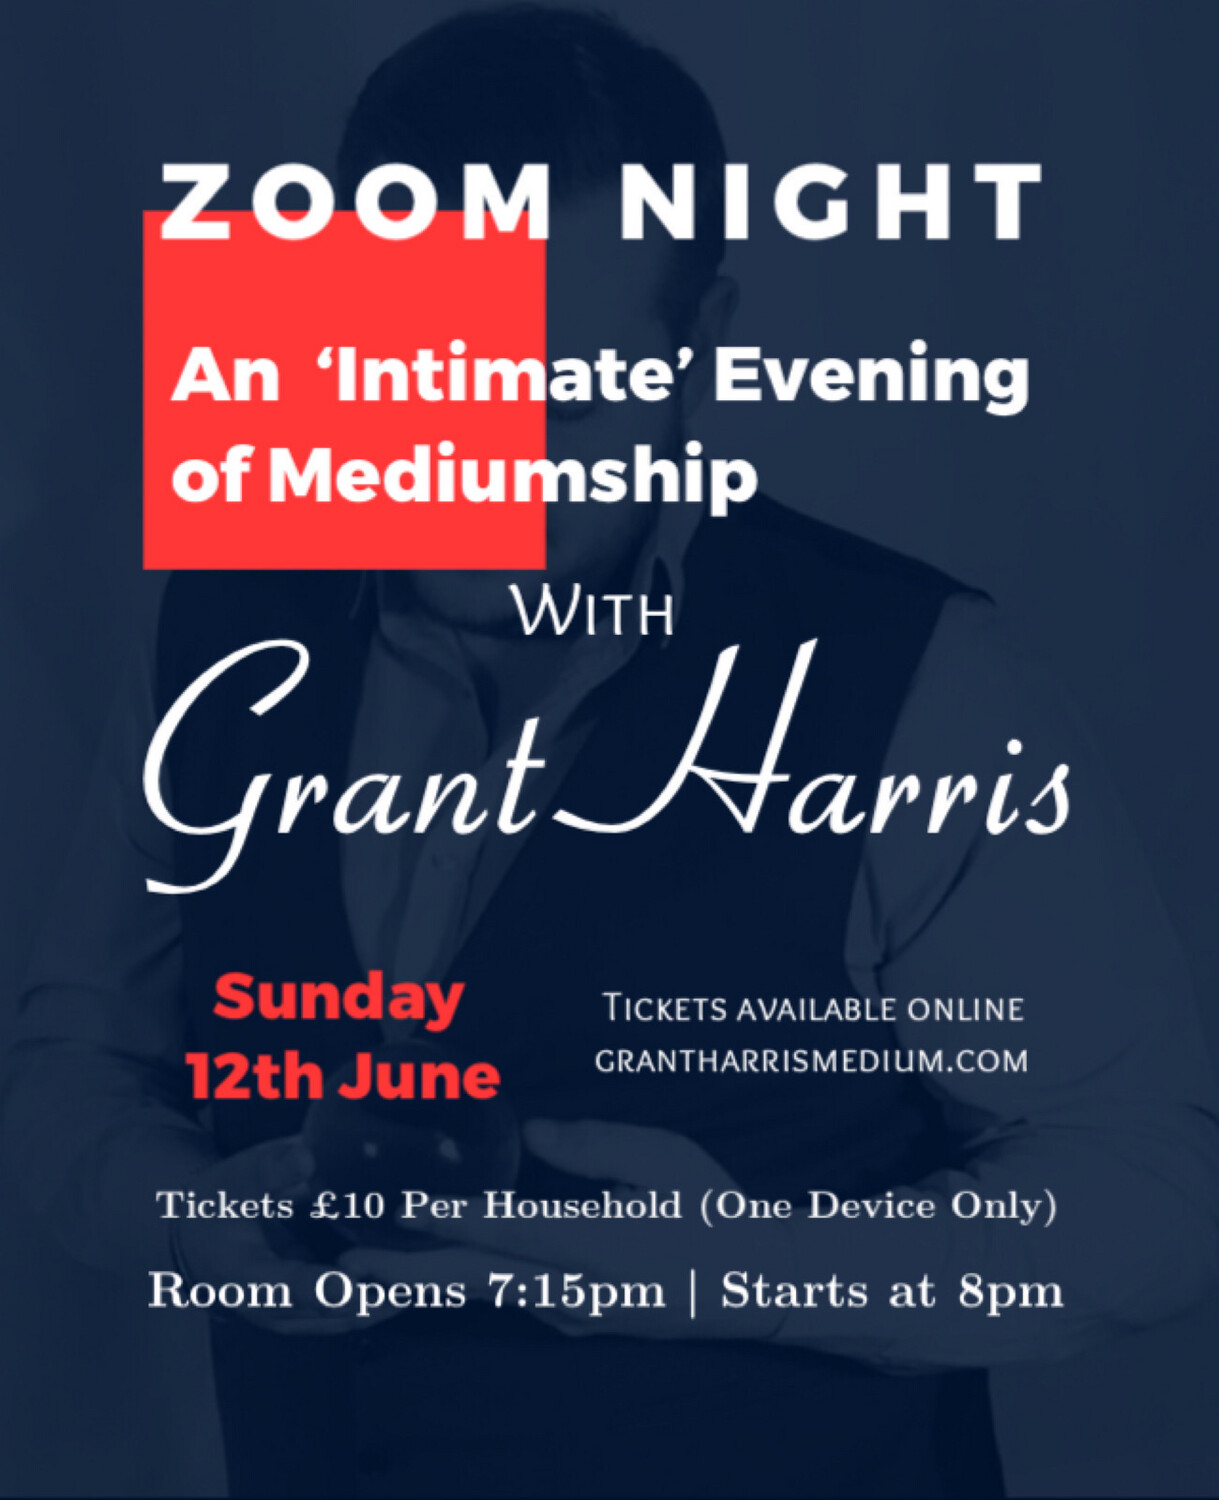 An ‘Intimate’ Zoom Evening of Mediumship with Grant Harris, Sun 12th June 2022